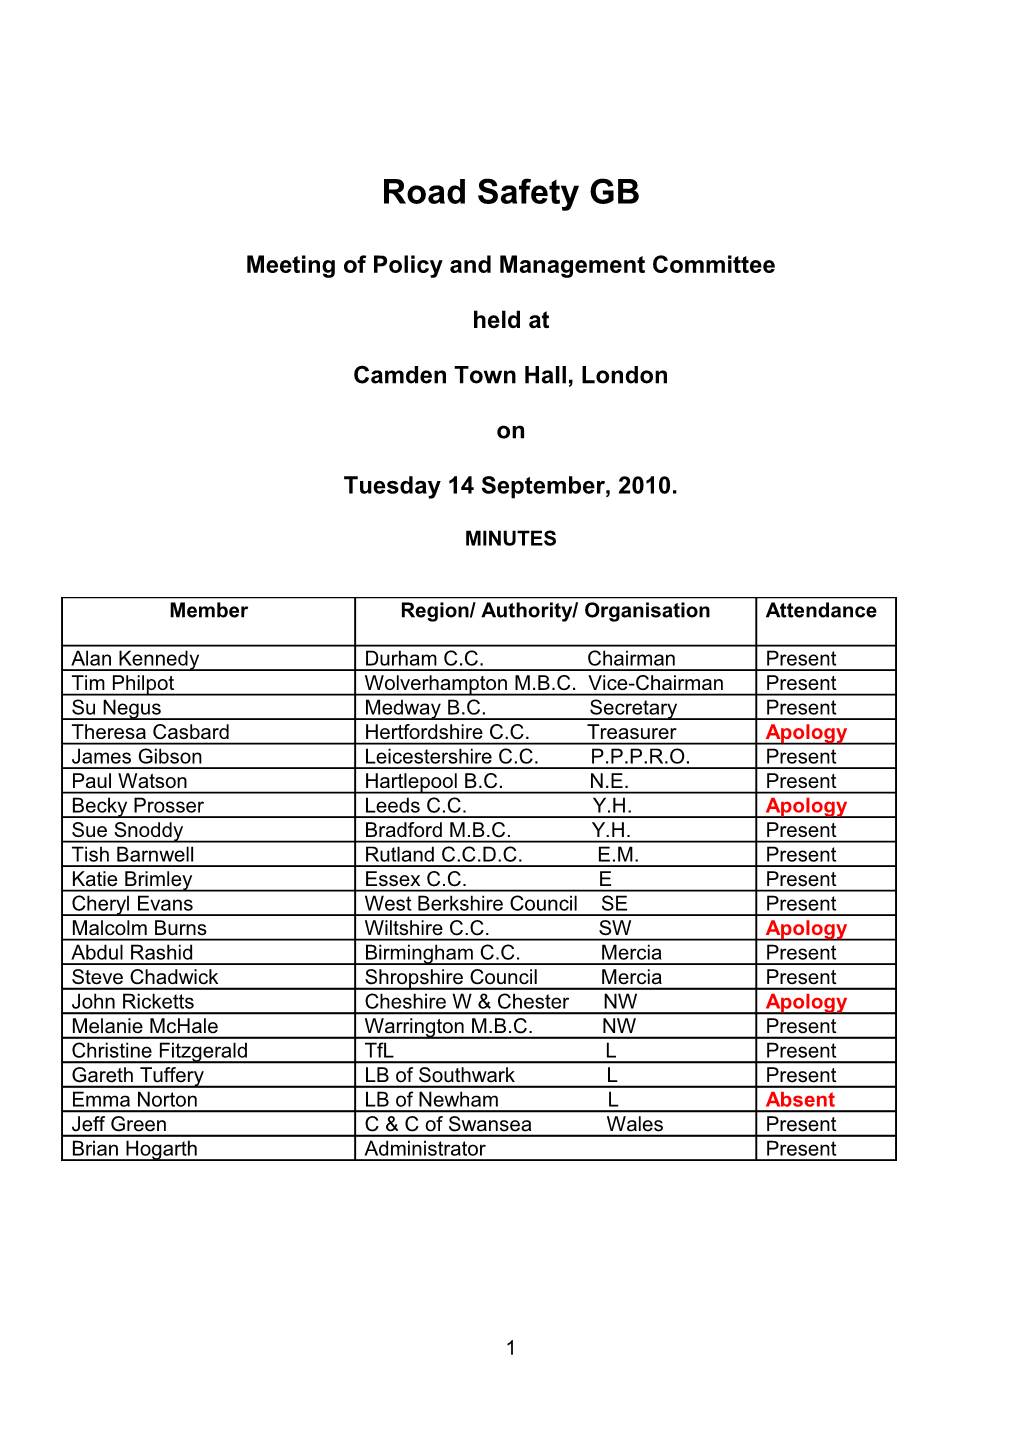 Meeting of Policy and Management Committee